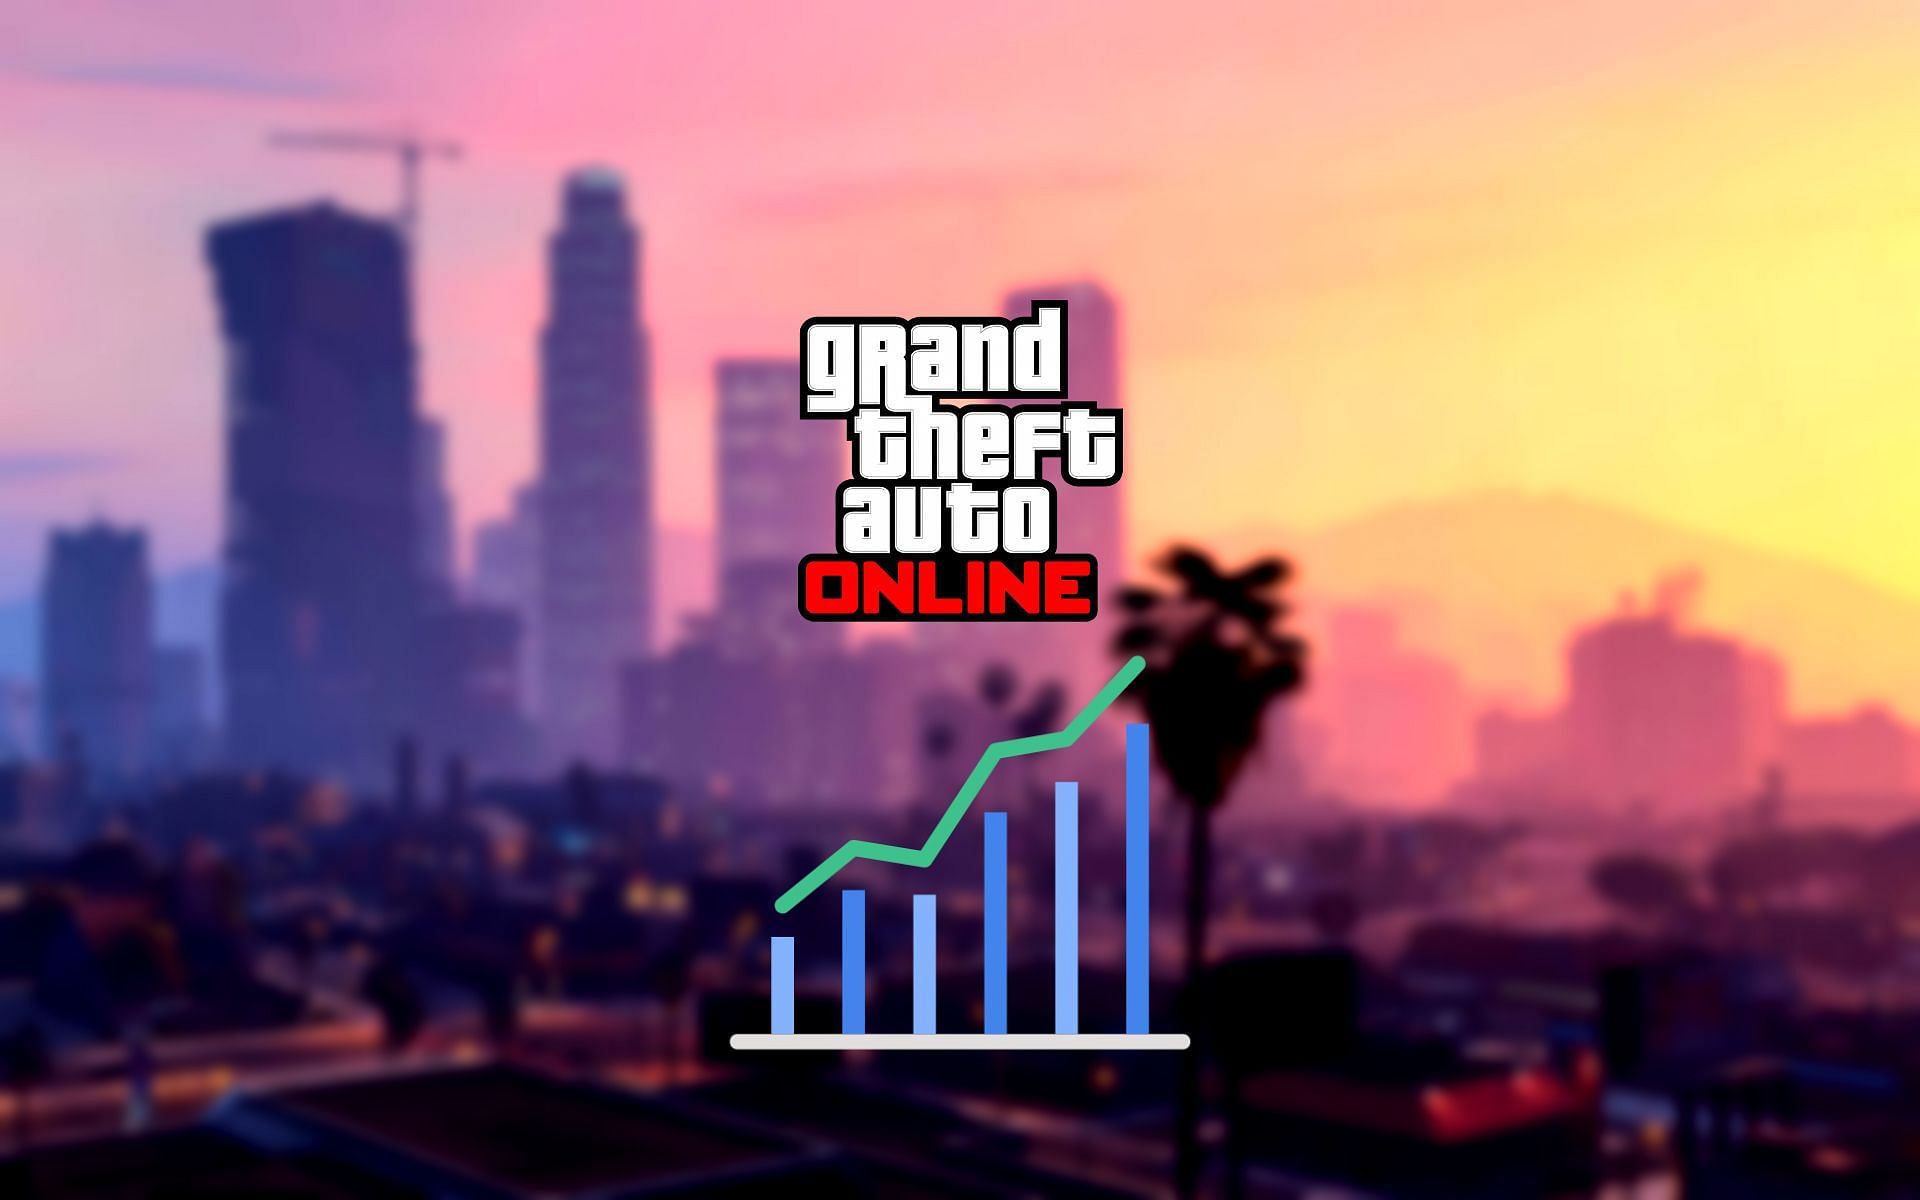 Grand Theft Auto Online comes out at top once again (Image via Sportskeeda)